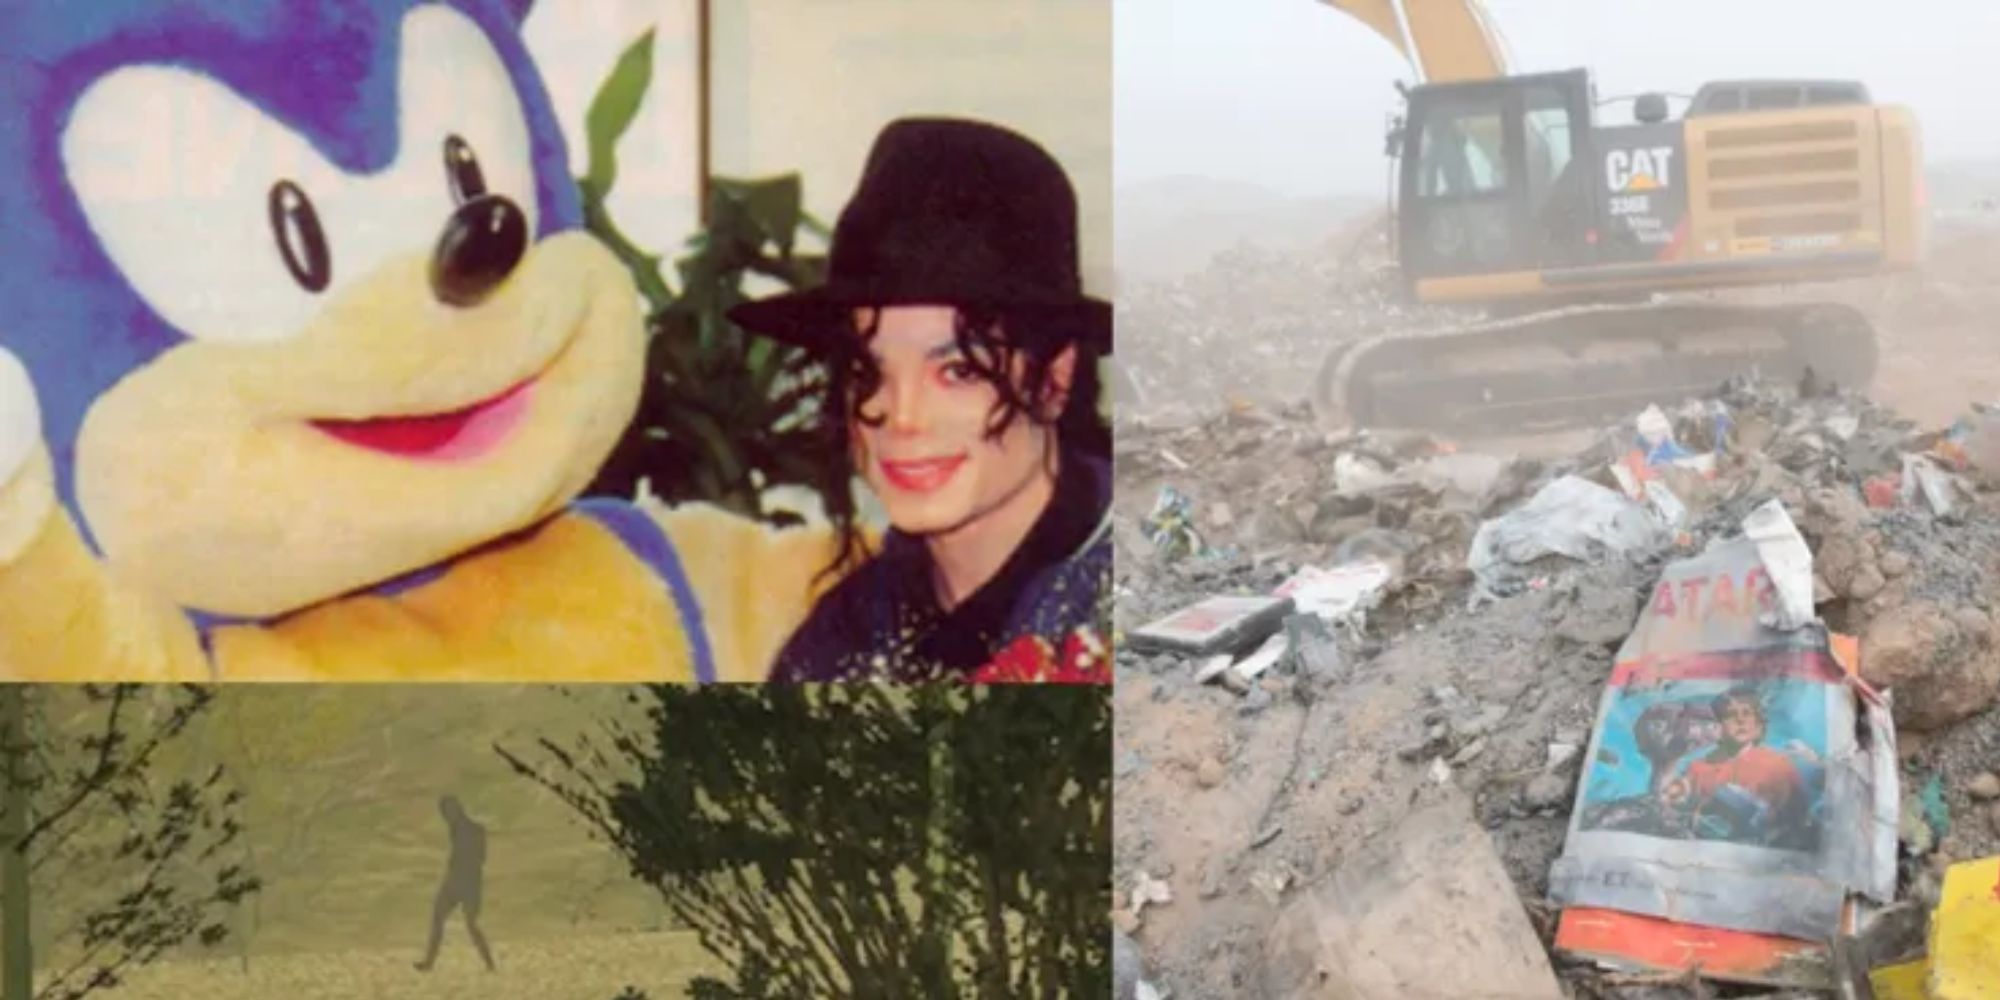 Michael Jackson with a Sonic mascot, Big foot in San Andreas